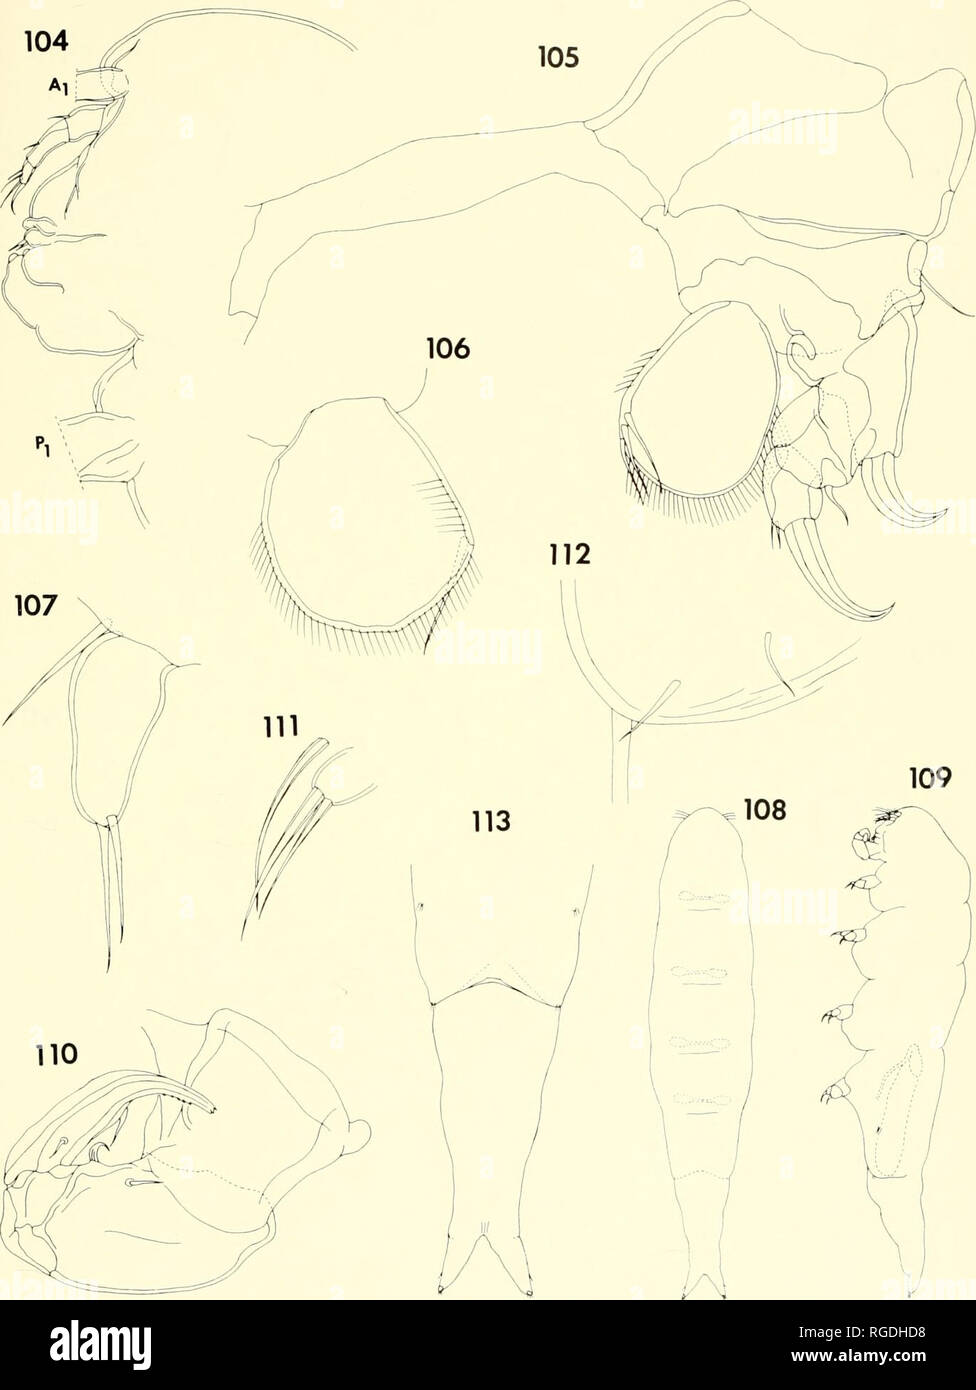 . Bulletin of the Museum of Comparative Zoology at Harvard College. Zoology. Parasitic Copepods from Corals lx Madagascar • Humes and Ho 447 '°^,j/^ i,,&quot;^-. Figures 104-107. Xarilia obeso n, sp., female (continued). 104, anterior part of body, lateral (F); 105, leg 1 and inter- coxal plate, posterior (D); 106, endopod of leg 3, anterior (D); 107, leg 5, ventral (D). Figures 108-113. Xanfio obesa n. sp., male. 108, body, dorsal (A); 109, body, lateral (A); 110, maxilliped, inner (C); 111, leg 5, ventral |E); 112, leg 6, ventral (E); 113, urosome, ventral (B).. Please note that these images Stock Photo